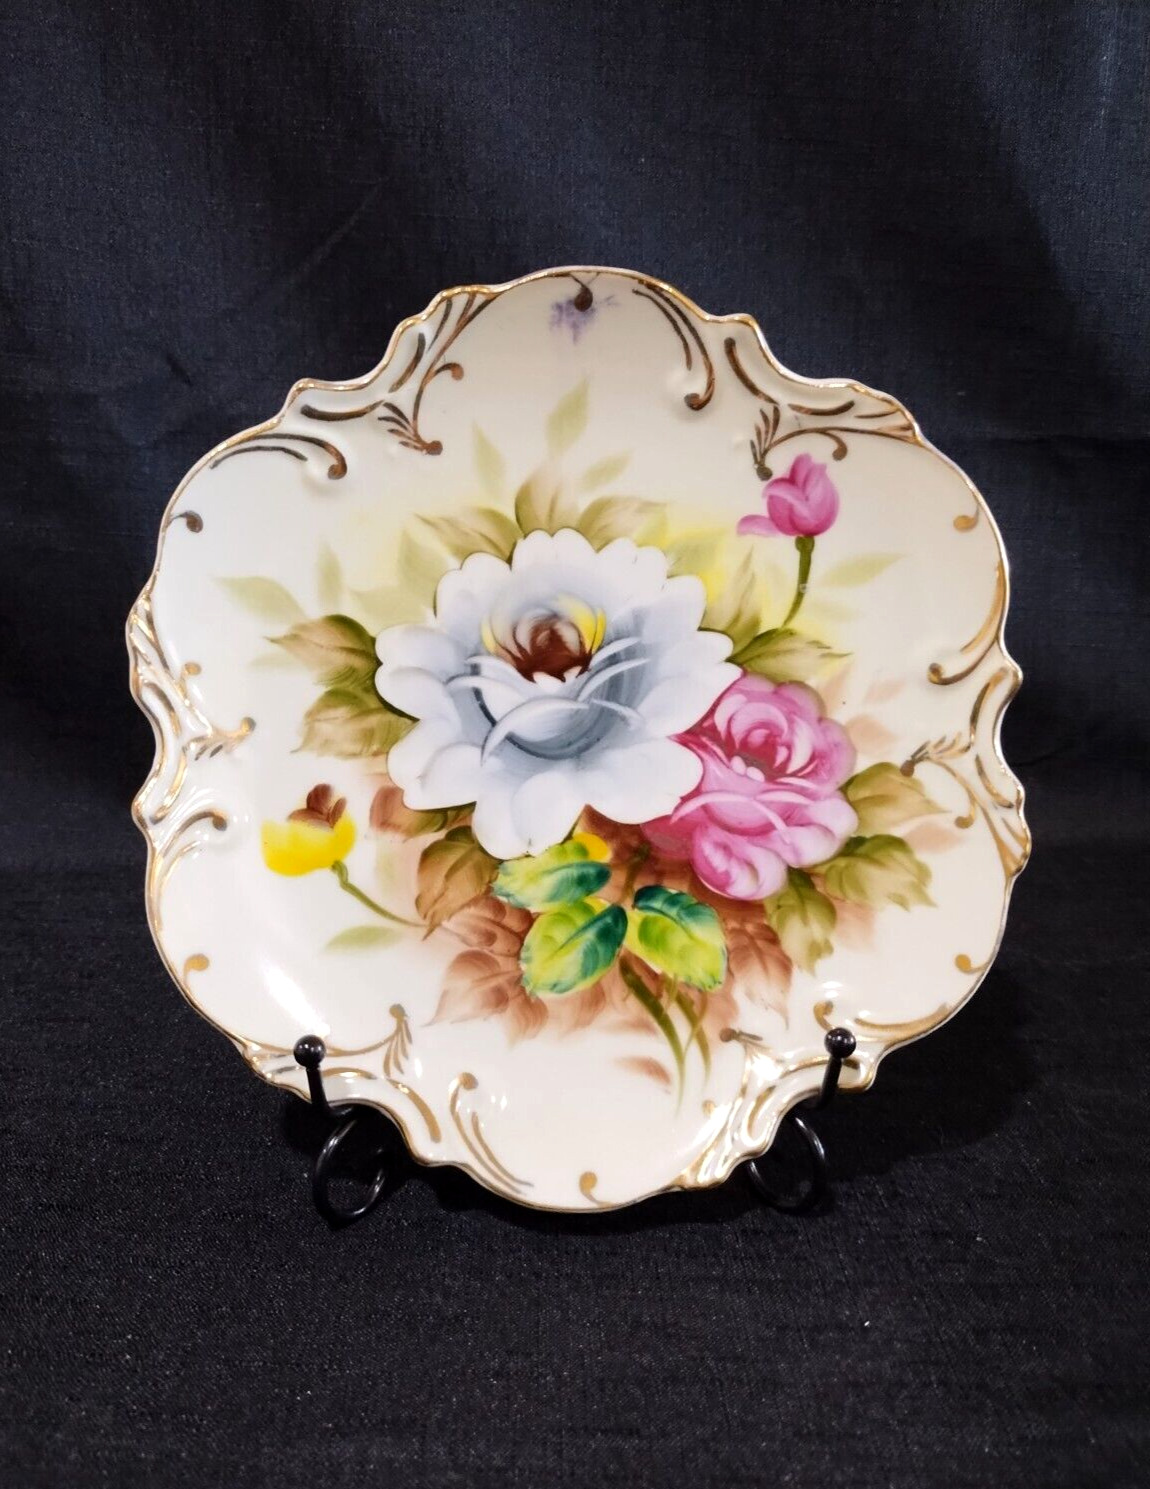 Vintage Lefton Wall Plate Scalloped Edge Hand Painted White Pink Rose Gold Trim 